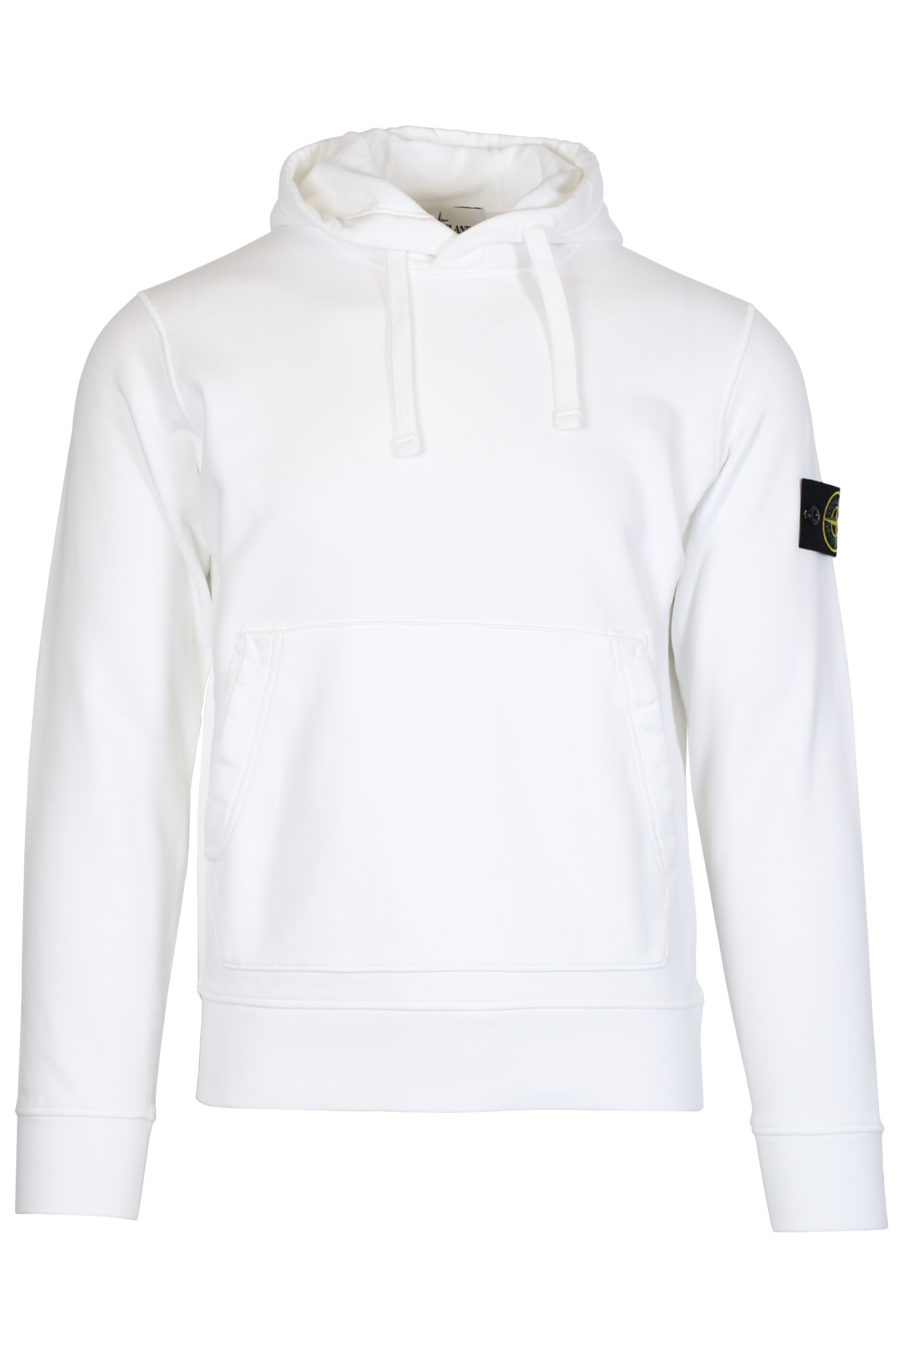 White hooded sweatshirt with logo patch - IMG 2473